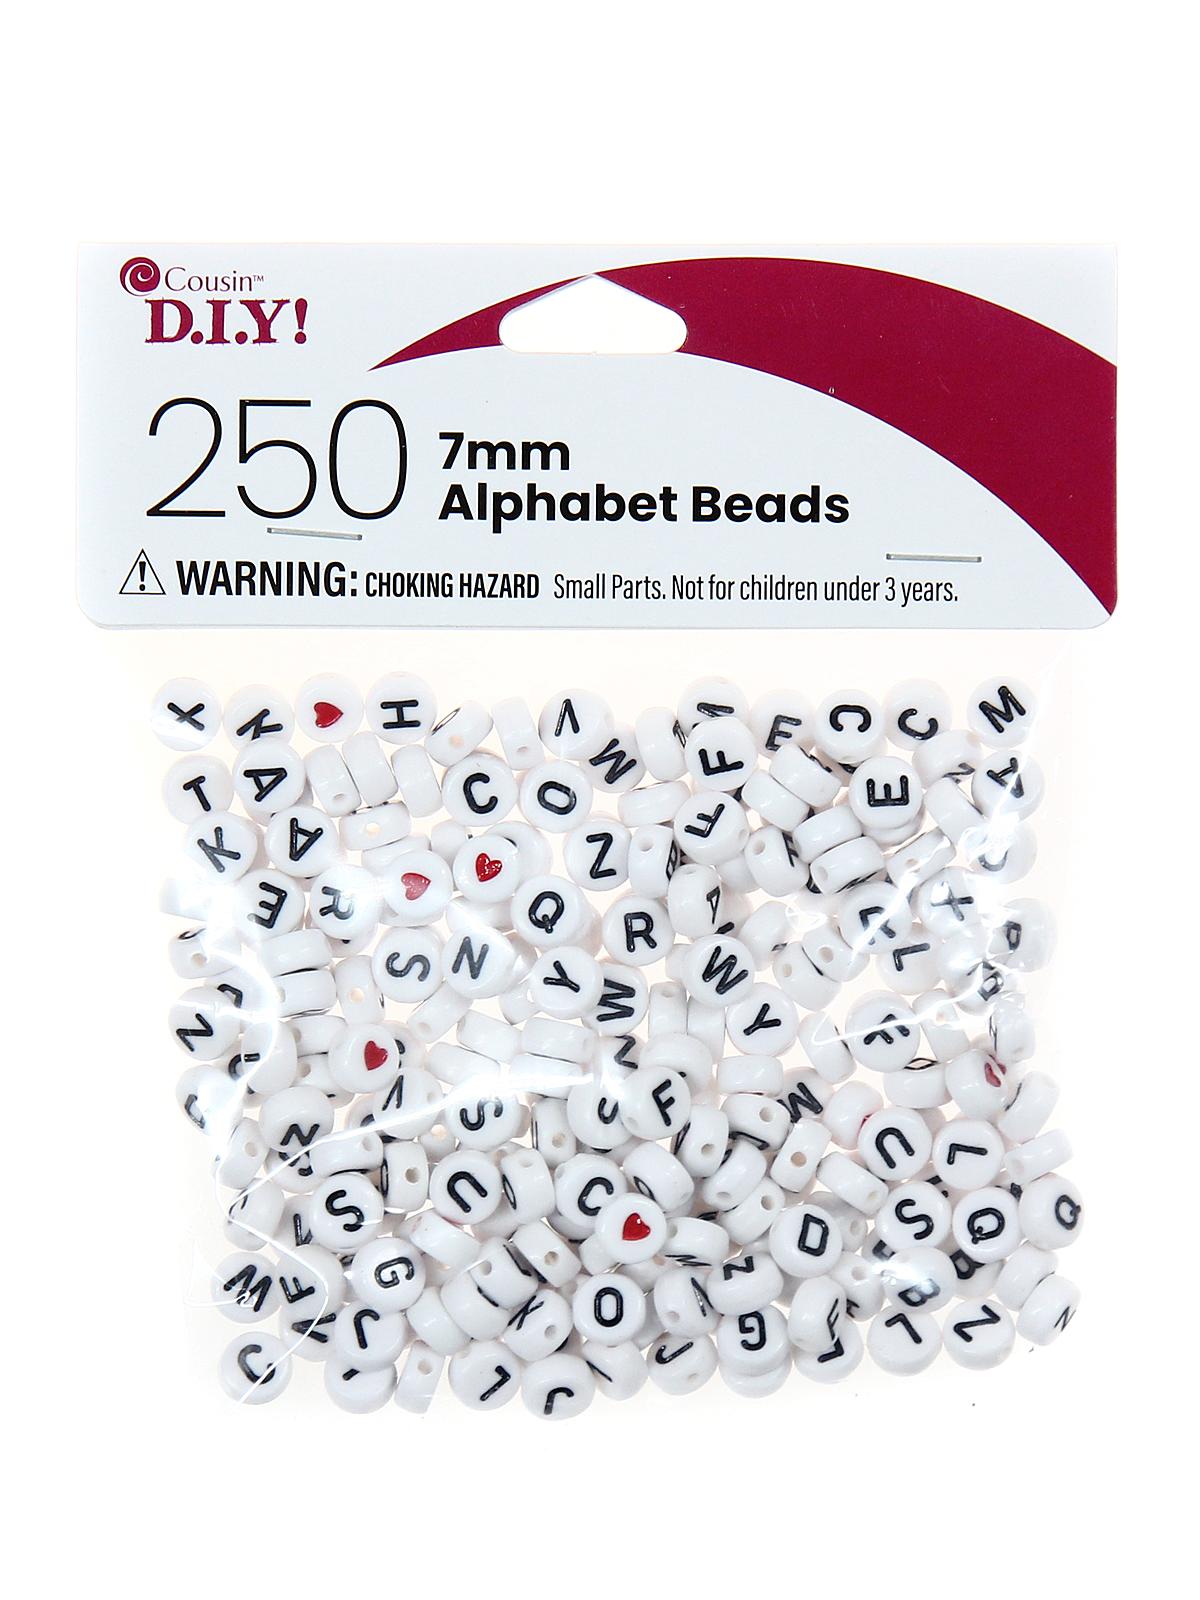 Alphabet Beads Black On White And Red Hearts Round, 7mm Pack Of 250